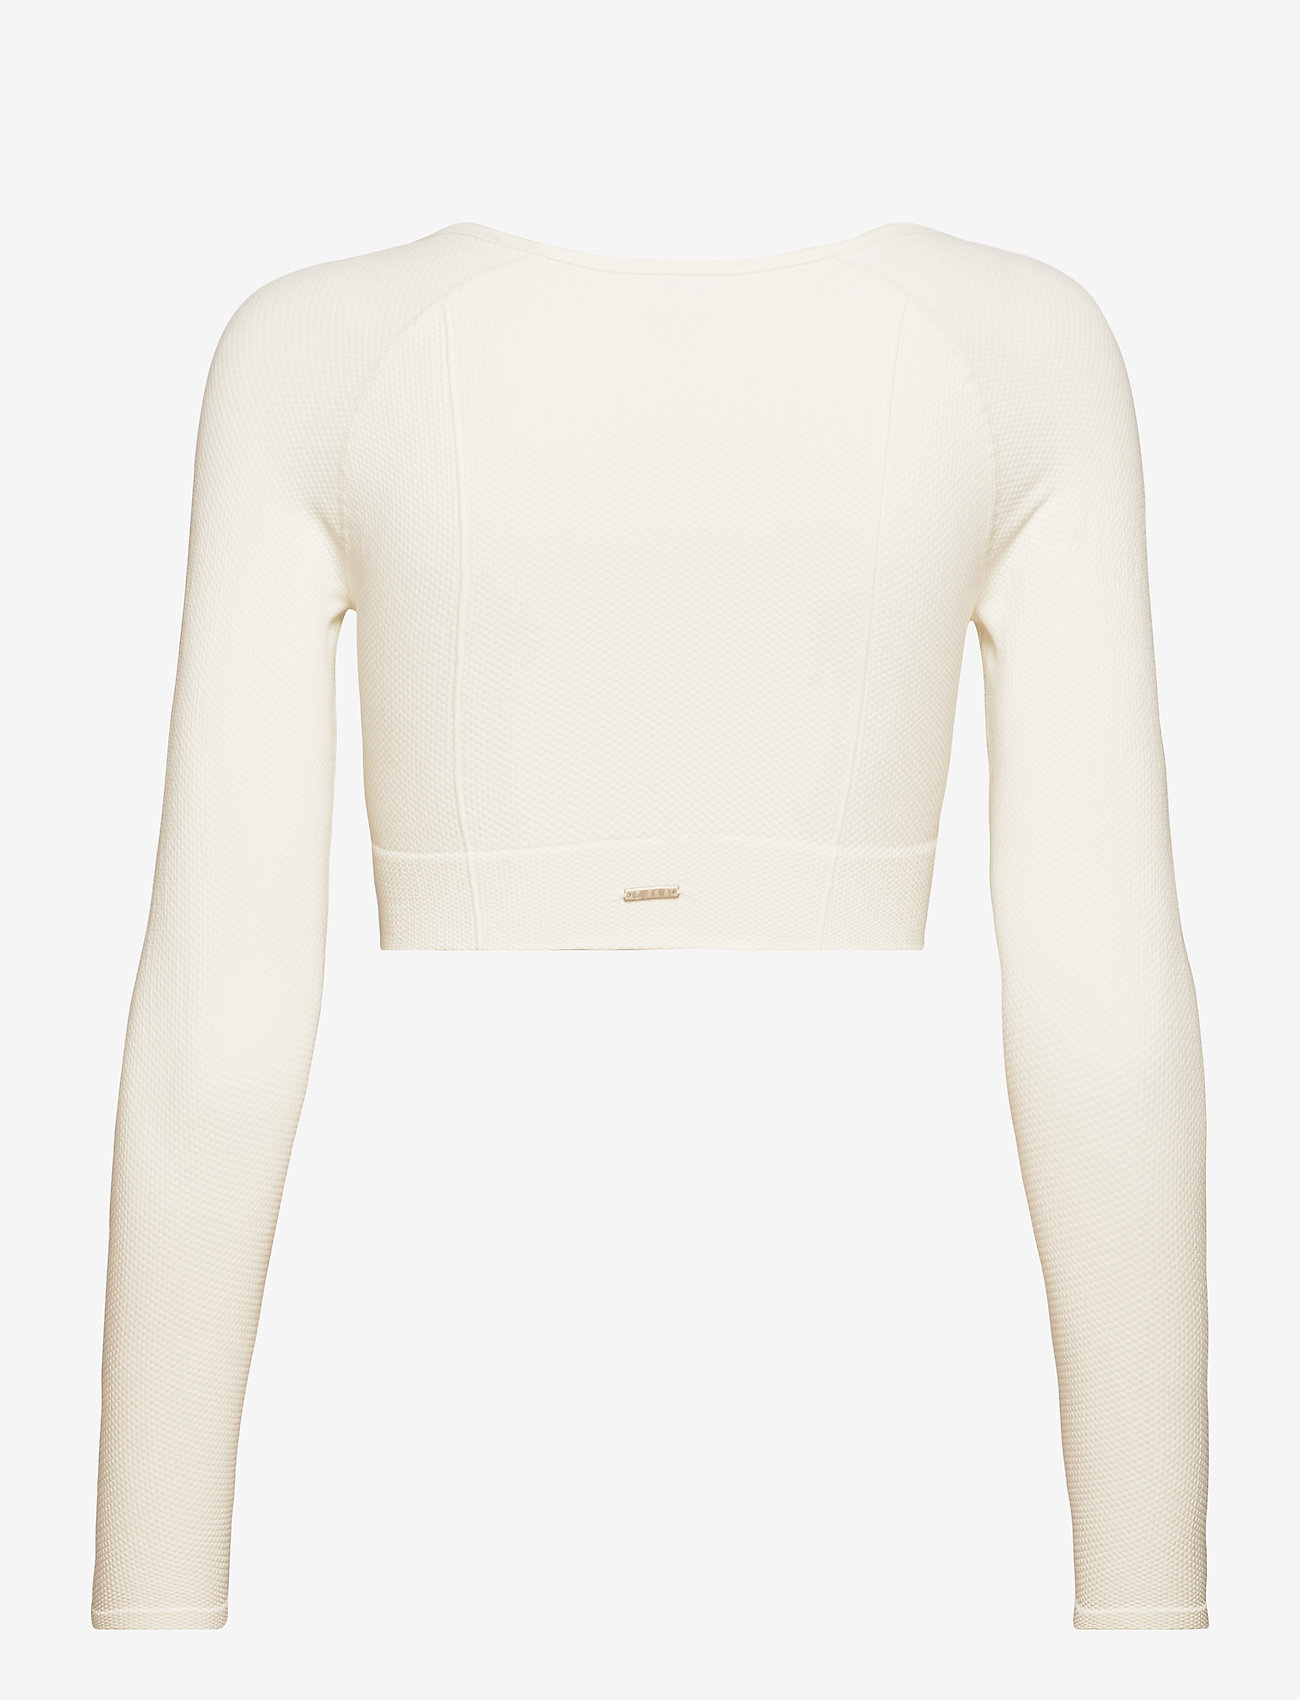 AIM'N - Luxe Seamless Crop Long Sleeve - pitkähihaiset topit - off-white - 1